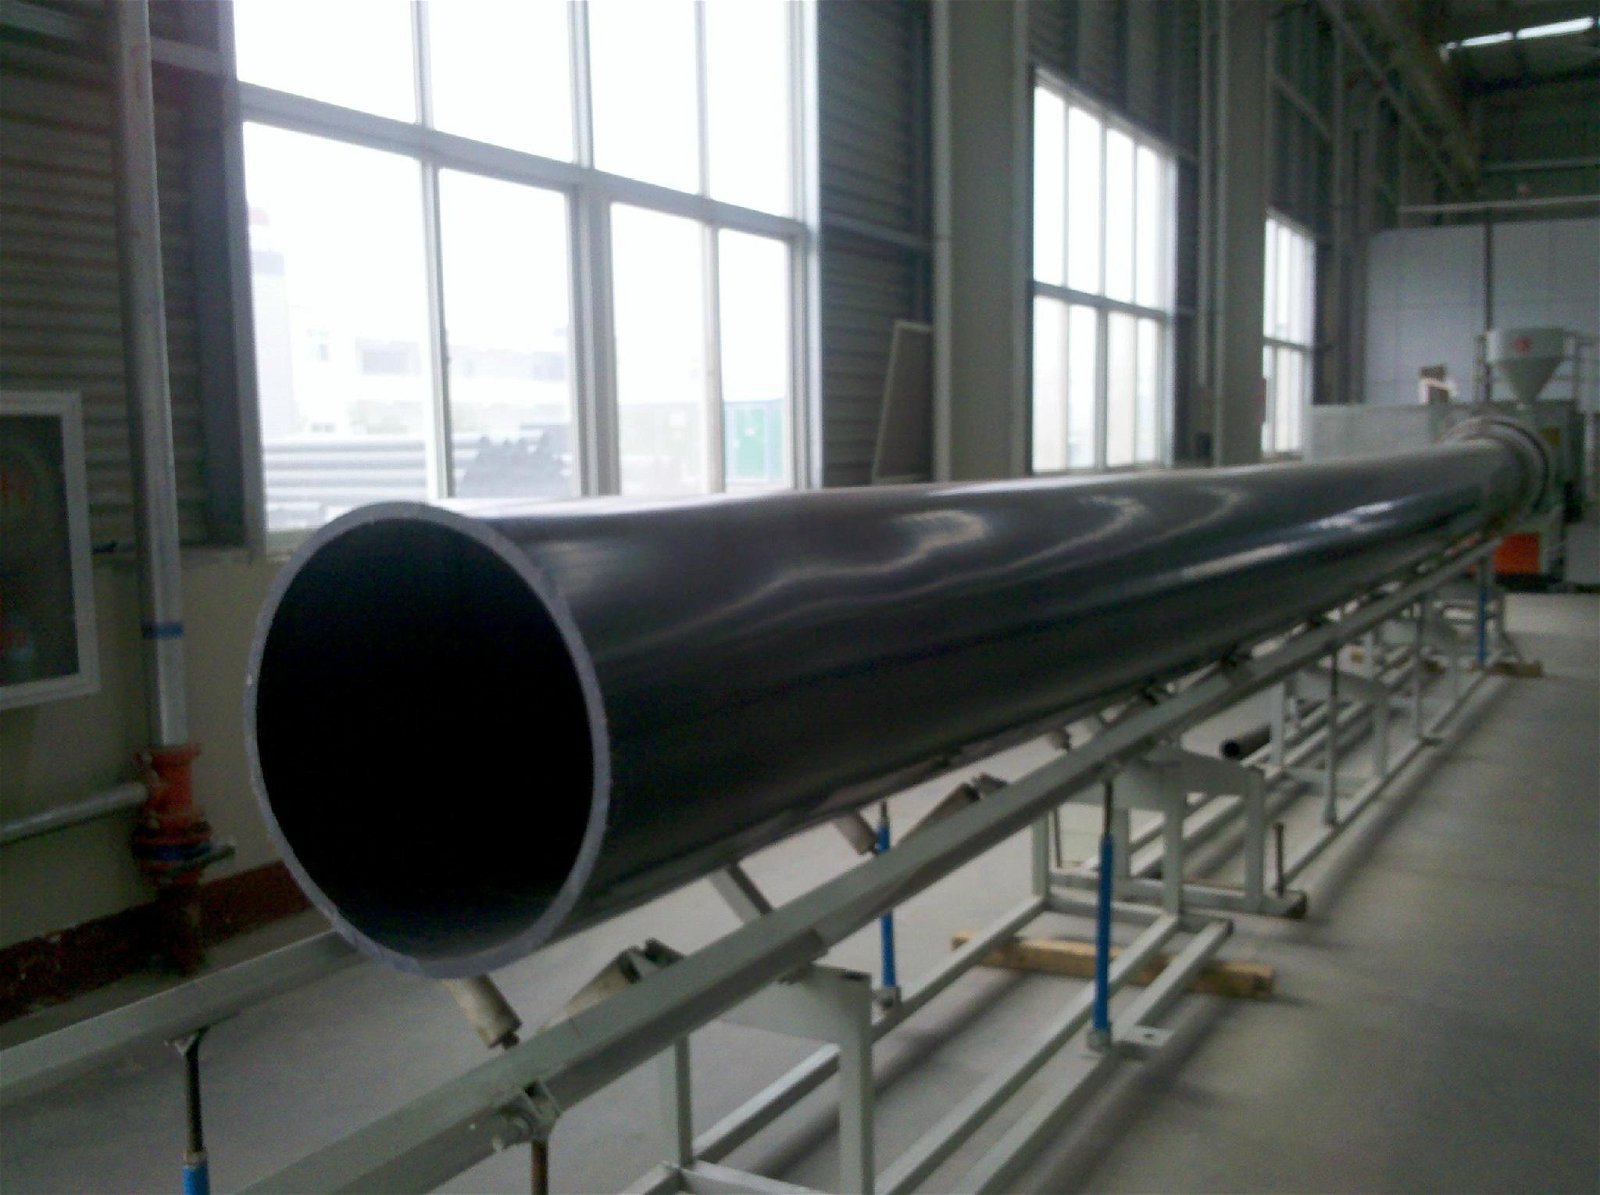 uhmwpe pipes instead of steel pipe to transport mining tails in dredging project 2